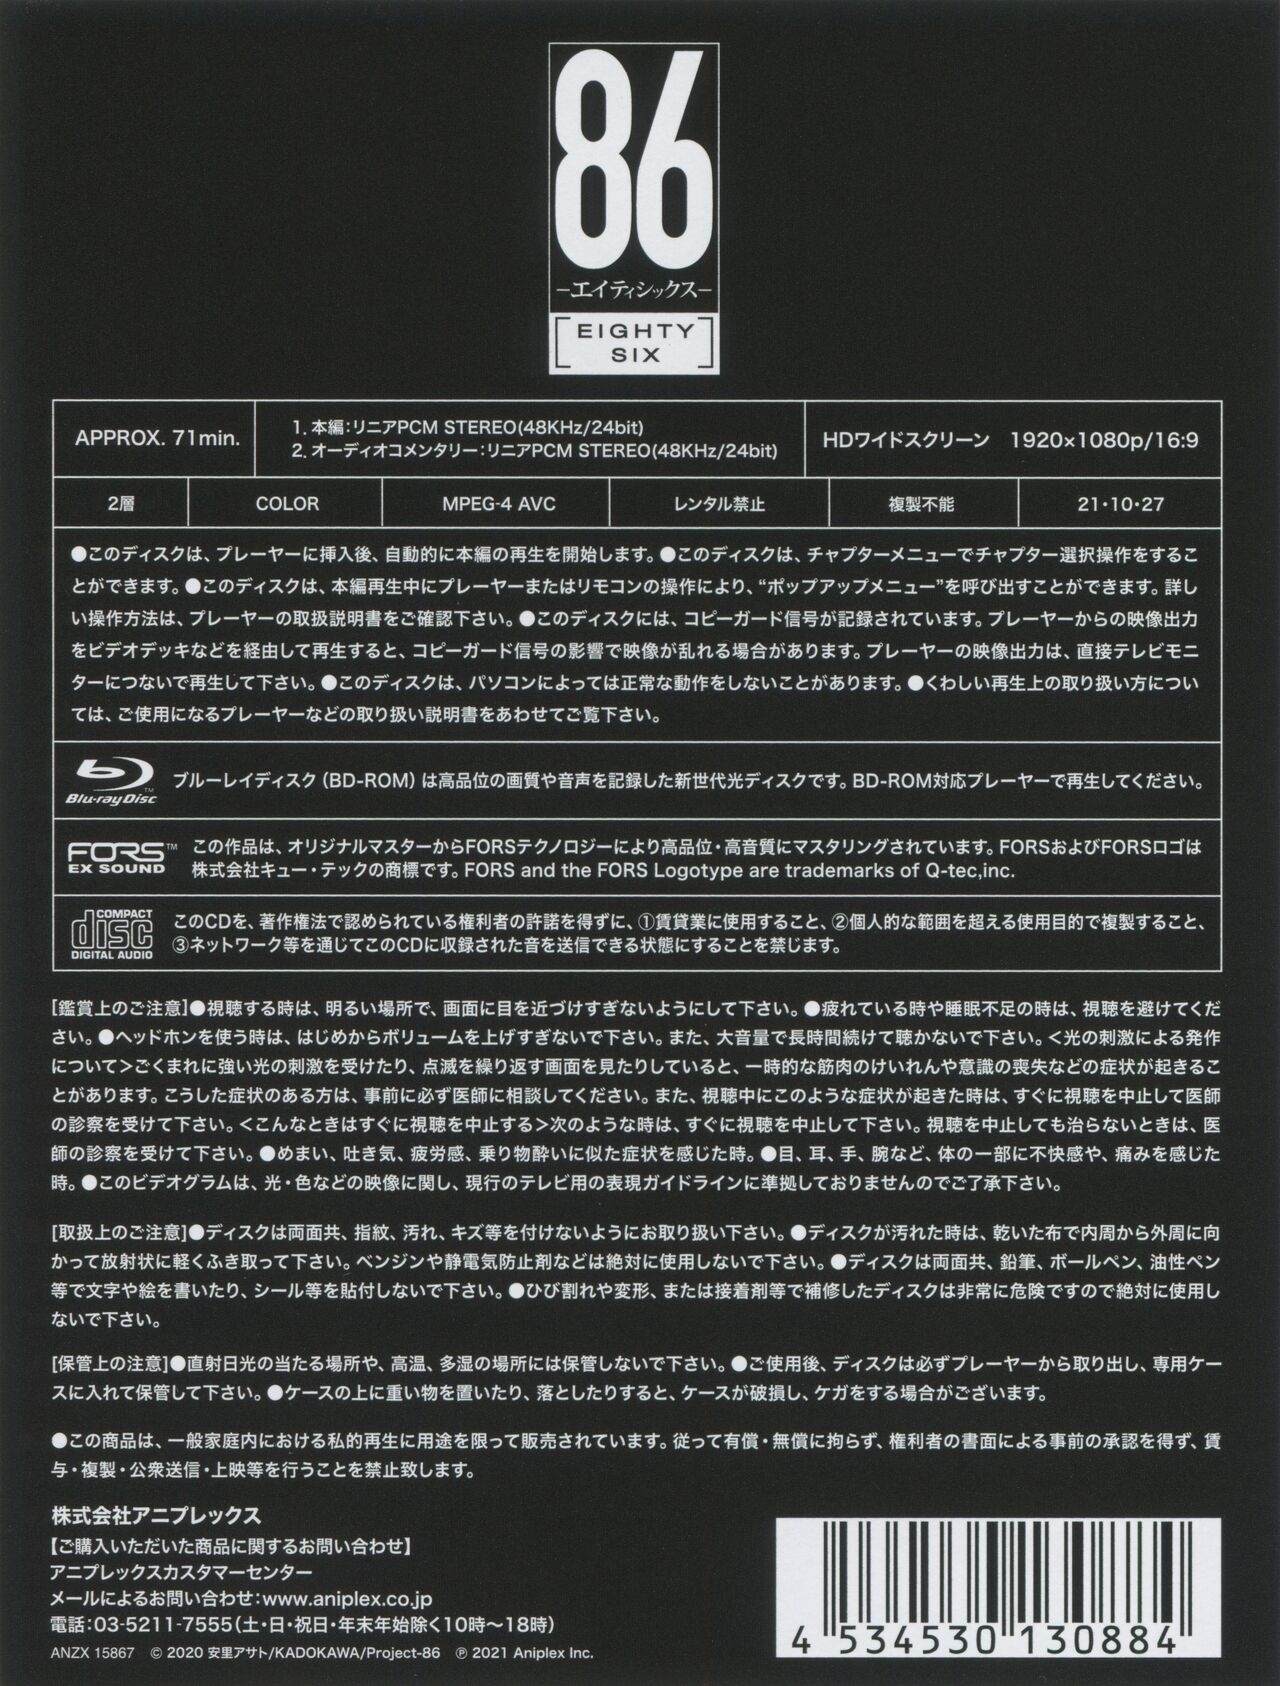 86 Eighty Six BD Scans + Booklet 126